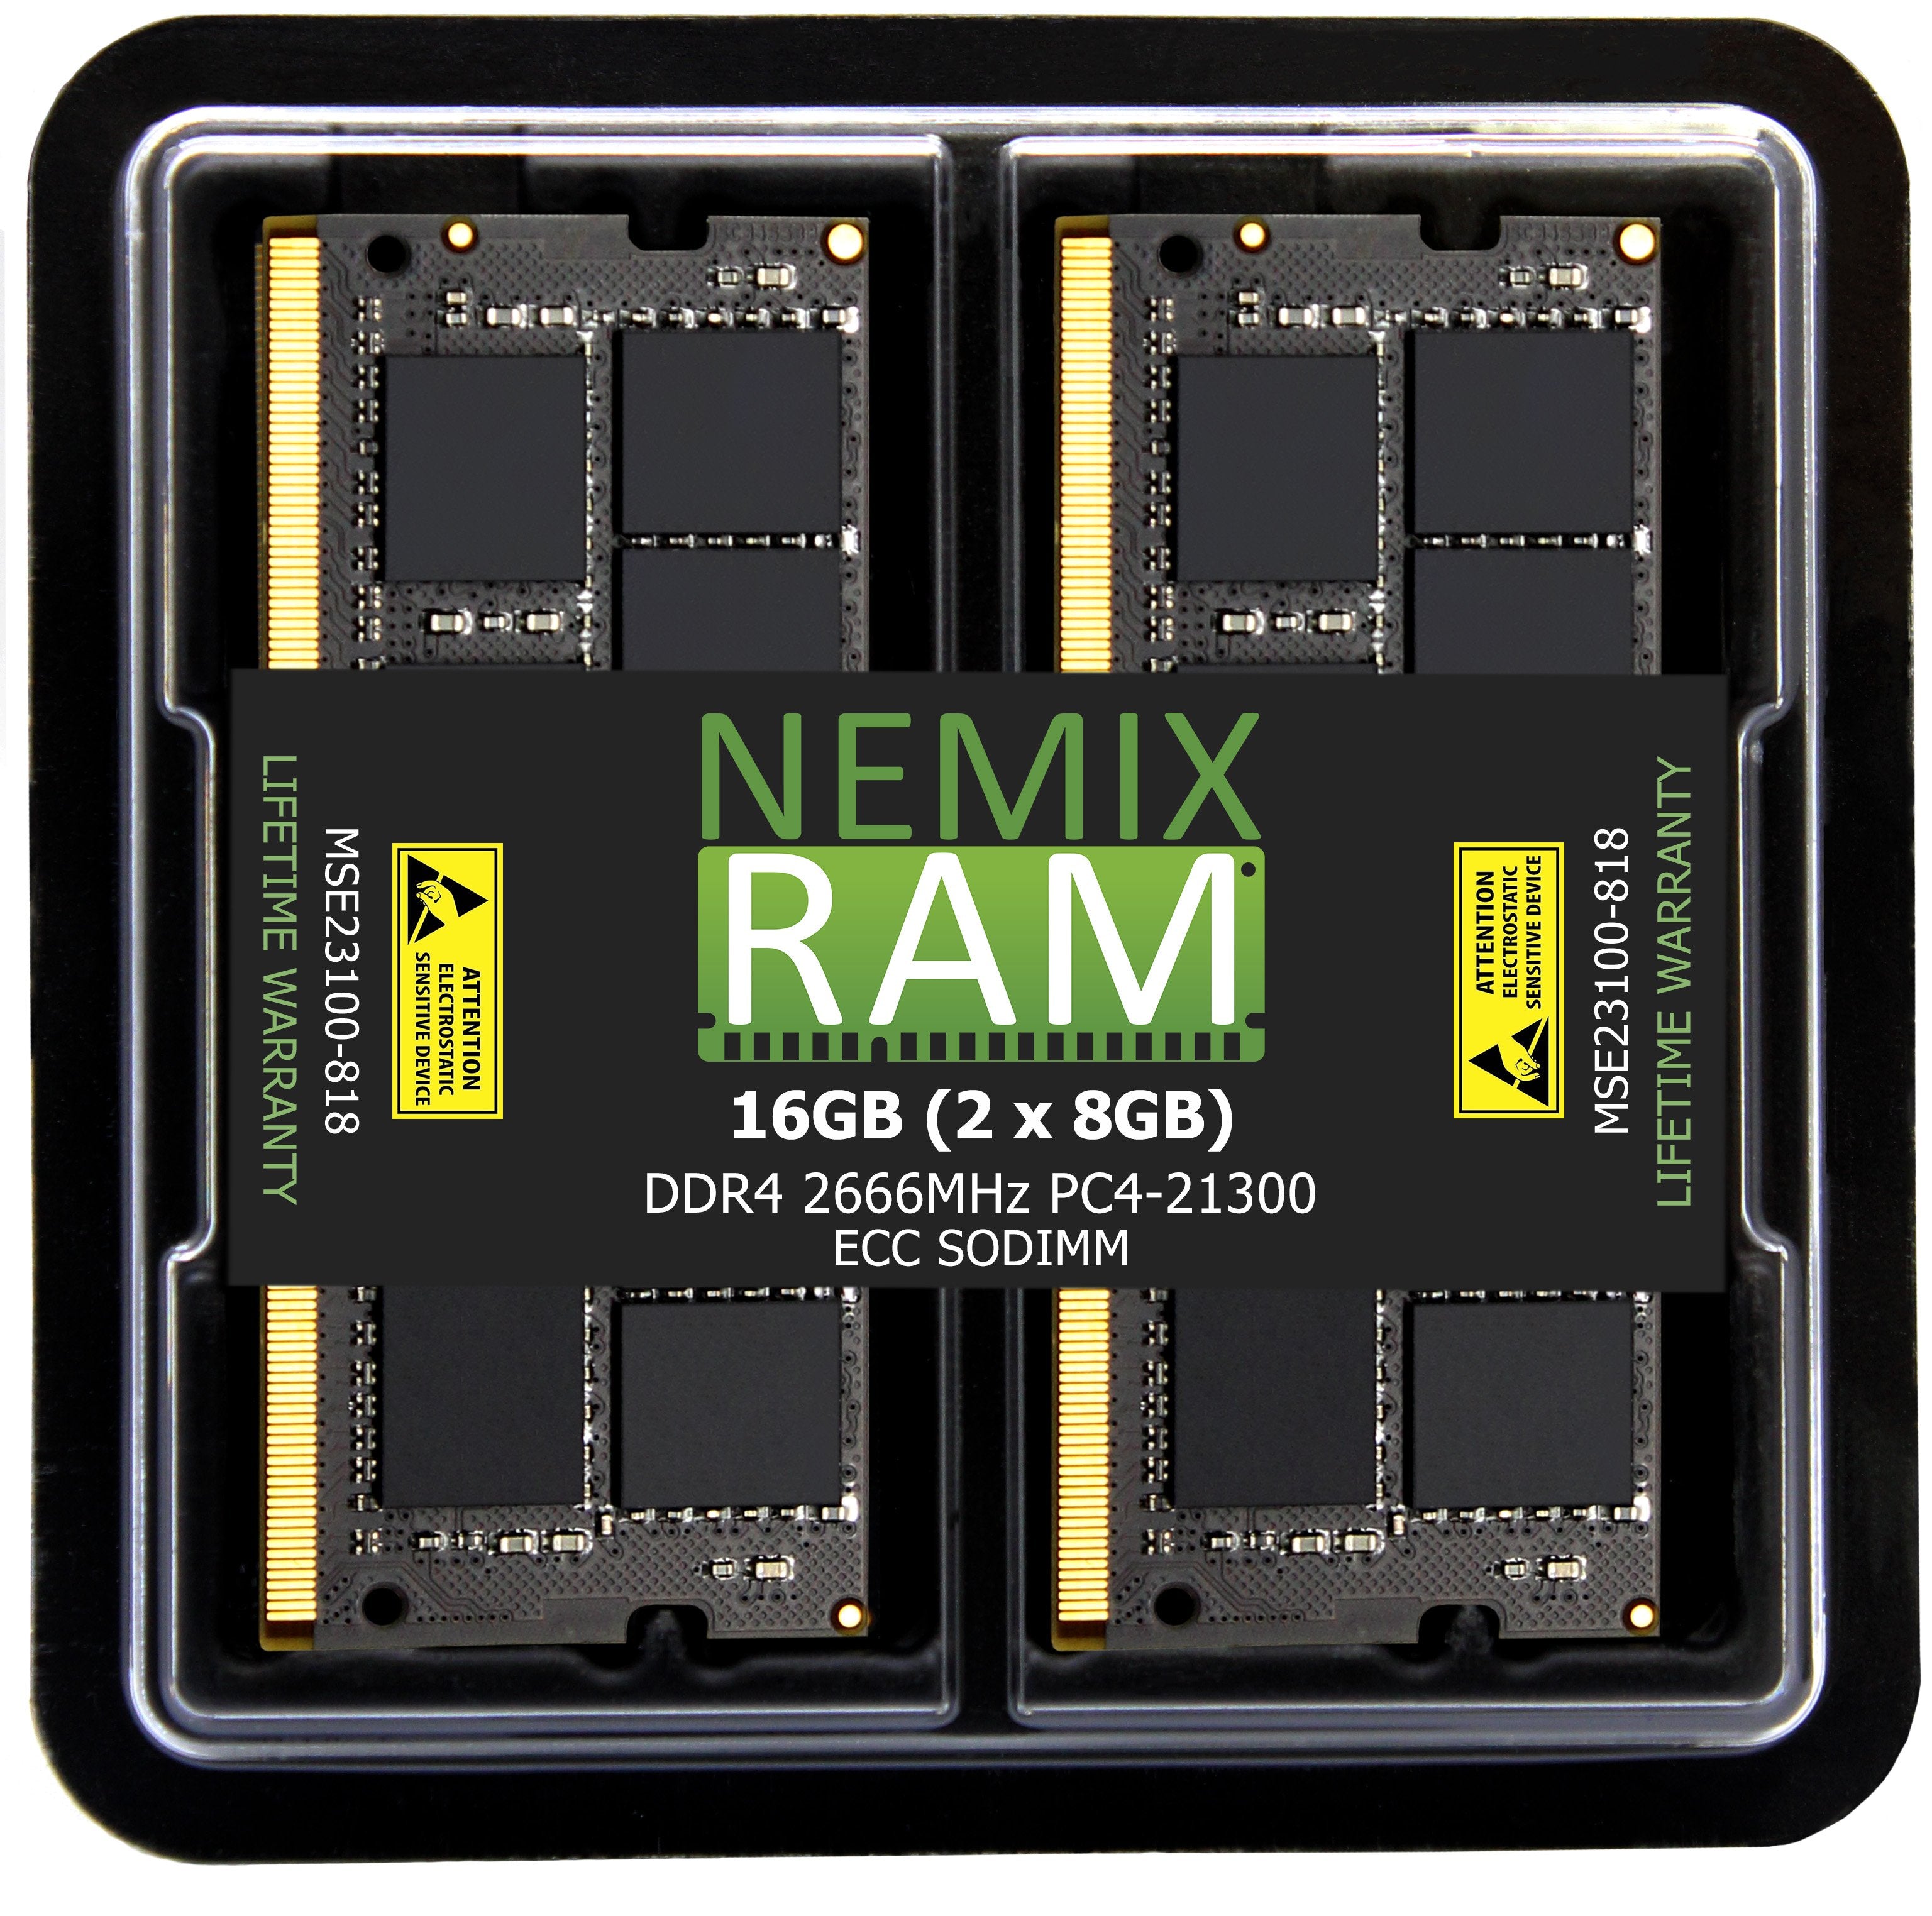 DDR4 2666MHZ PC4-21300 ECC SODIMM Compatible with Synology RackStation RS822RP+